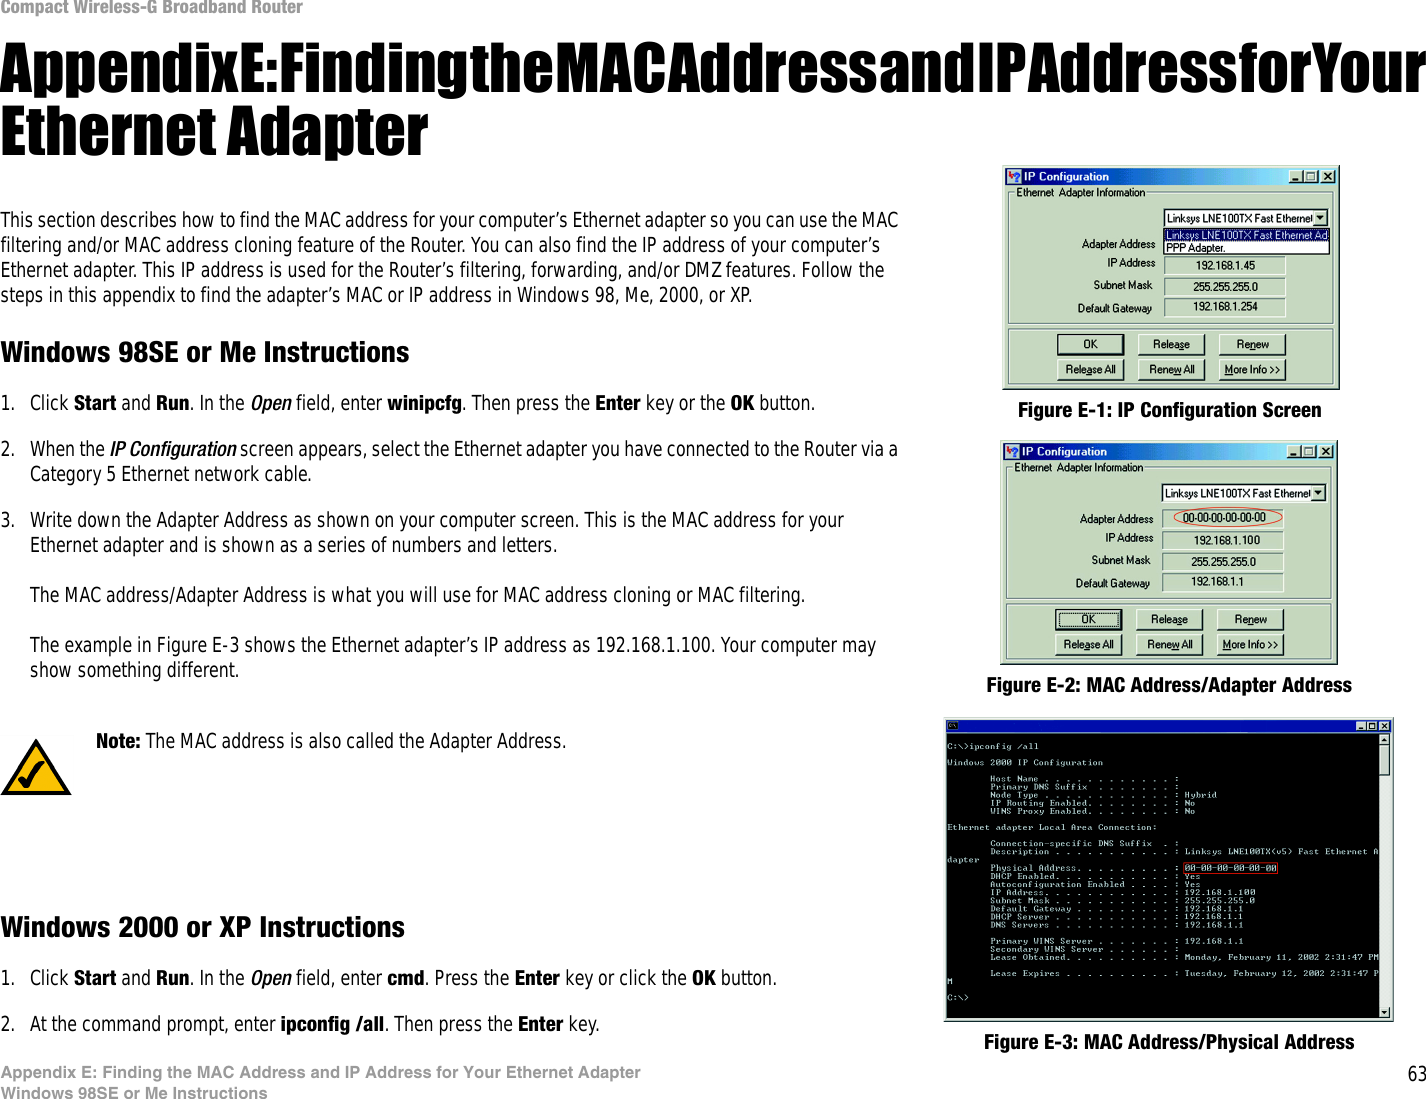 63Appendix E: Finding the MAC Address and IP Address for Your Ethernet AdapterWindows 98SE or Me InstructionsCompact Wireless-G Broadband RouterAppendix E: Finding the MAC Address and IP Address for Your Ethernet AdapterThis section describes how to find the MAC address for your computer’s Ethernet adapter so you can use the MAC filtering and/or MAC address cloning feature of the Router. You can also find the IP address of your computer’s Ethernet adapter. This IP address is used for the Router’s filtering, forwarding, and/or DMZ features. Follow the steps in this appendix to find the adapter’s MAC or IP address in Windows 98, Me, 2000, or XP.Windows 98SE or Me Instructions1. Click Start and Run. In the Open field, enter winipcfg. Then press the Enter key or the OK button. 2. When the IP Configuration screen appears, select the Ethernet adapter you have connected to the Router via a Category 5 Ethernet network cable.3. Write down the Adapter Address as shown on your computer screen. This is the MAC address for your Ethernet adapter and is shown as a series of numbers and letters.The MAC address/Adapter Address is what you will use for MAC address cloning or MAC filtering.The example in Figure E-3 shows the Ethernet adapter’s IP address as 192.168.1.100. Your computer may show something different.Windows 2000 or XP Instructions1. Click Start and Run. In the Open field, enter cmd. Press the Enter key or click the OK button.2. At the command prompt, enter ipconfig /all. Then press the Enter key.Figure E-2: MAC Address/Adapter AddressFigure E-1: IP Configuration ScreenNote: The MAC address is also called the Adapter Address.Figure E-3: MAC Address/Physical Address